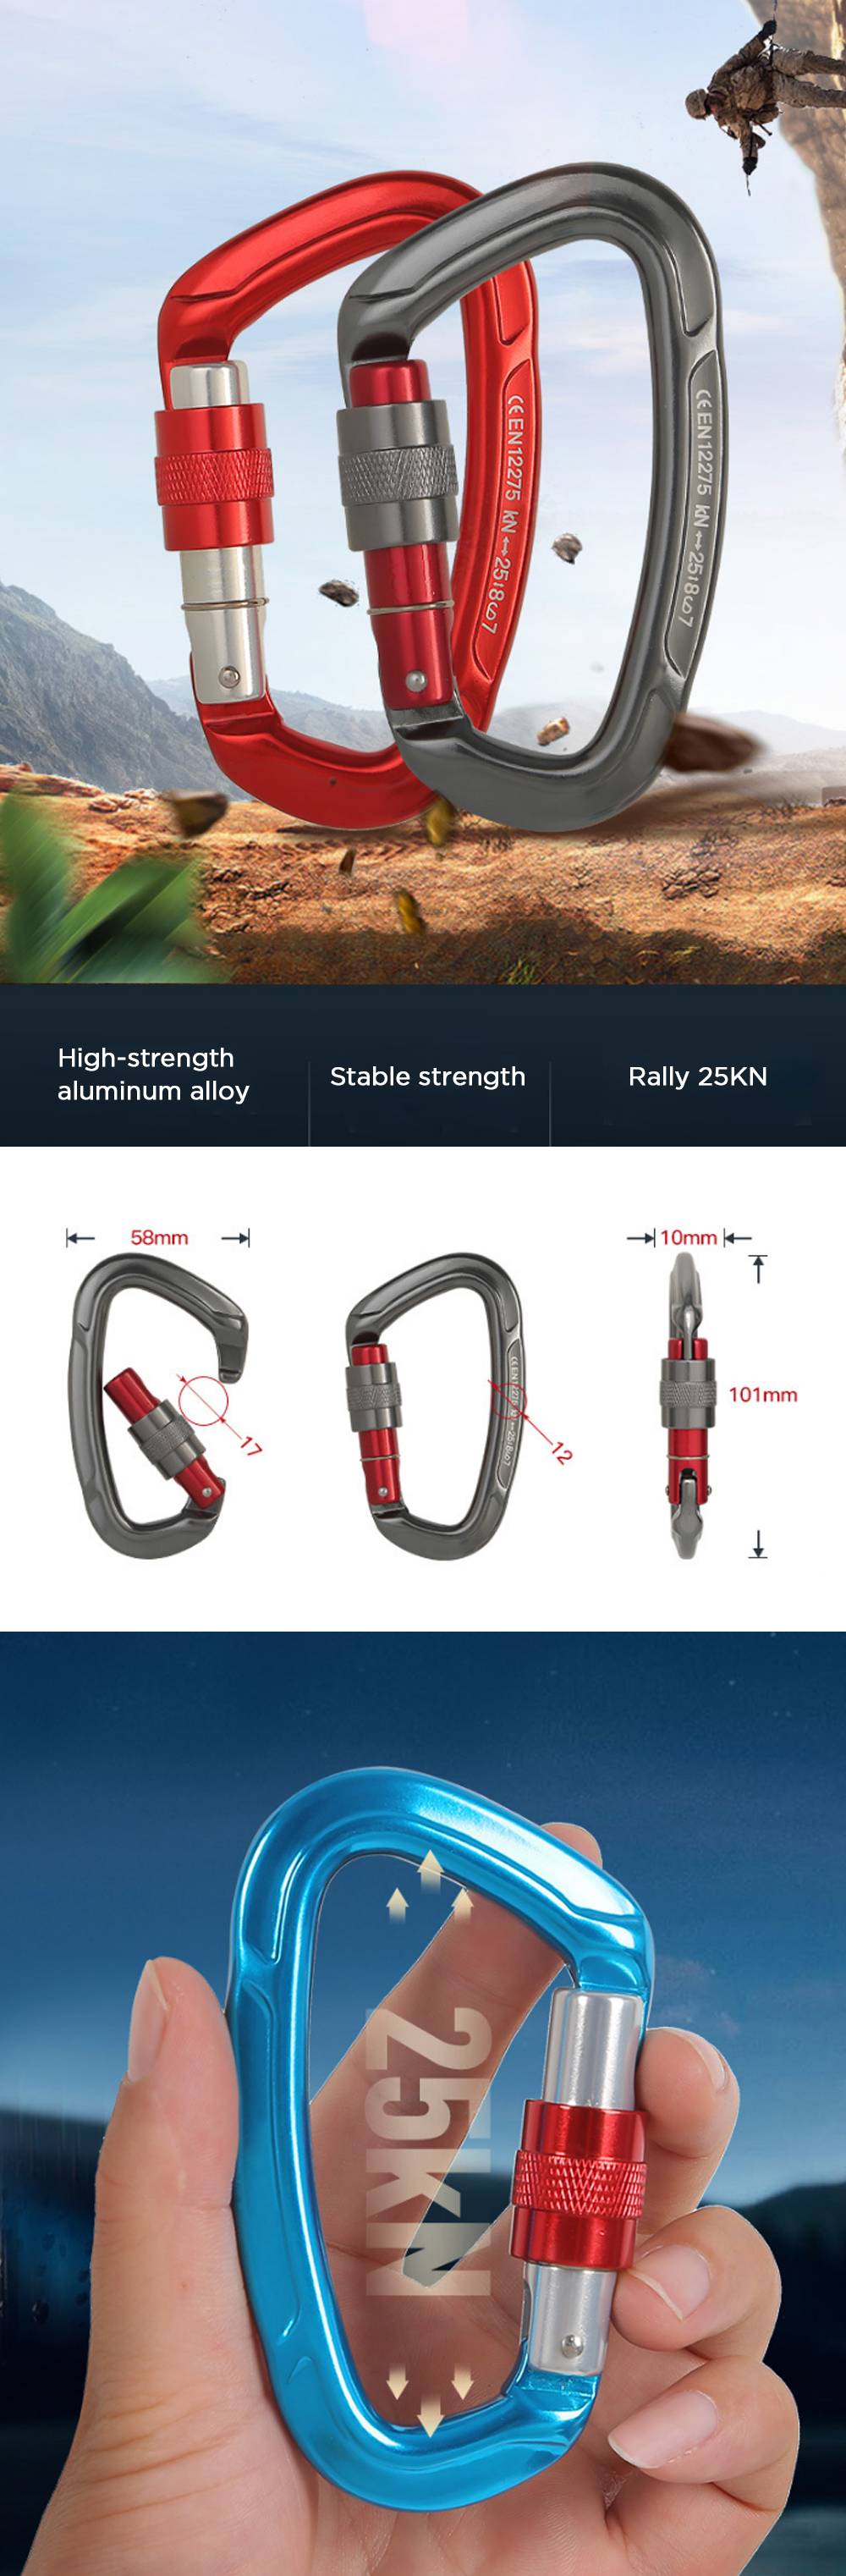 XINDA-25KN-Climbing-Carabiner-Safety-Master-Screw-Lock-D-Shaped-Buckle-for-Outdoor-Hiking-AdultTeena-1748693-1